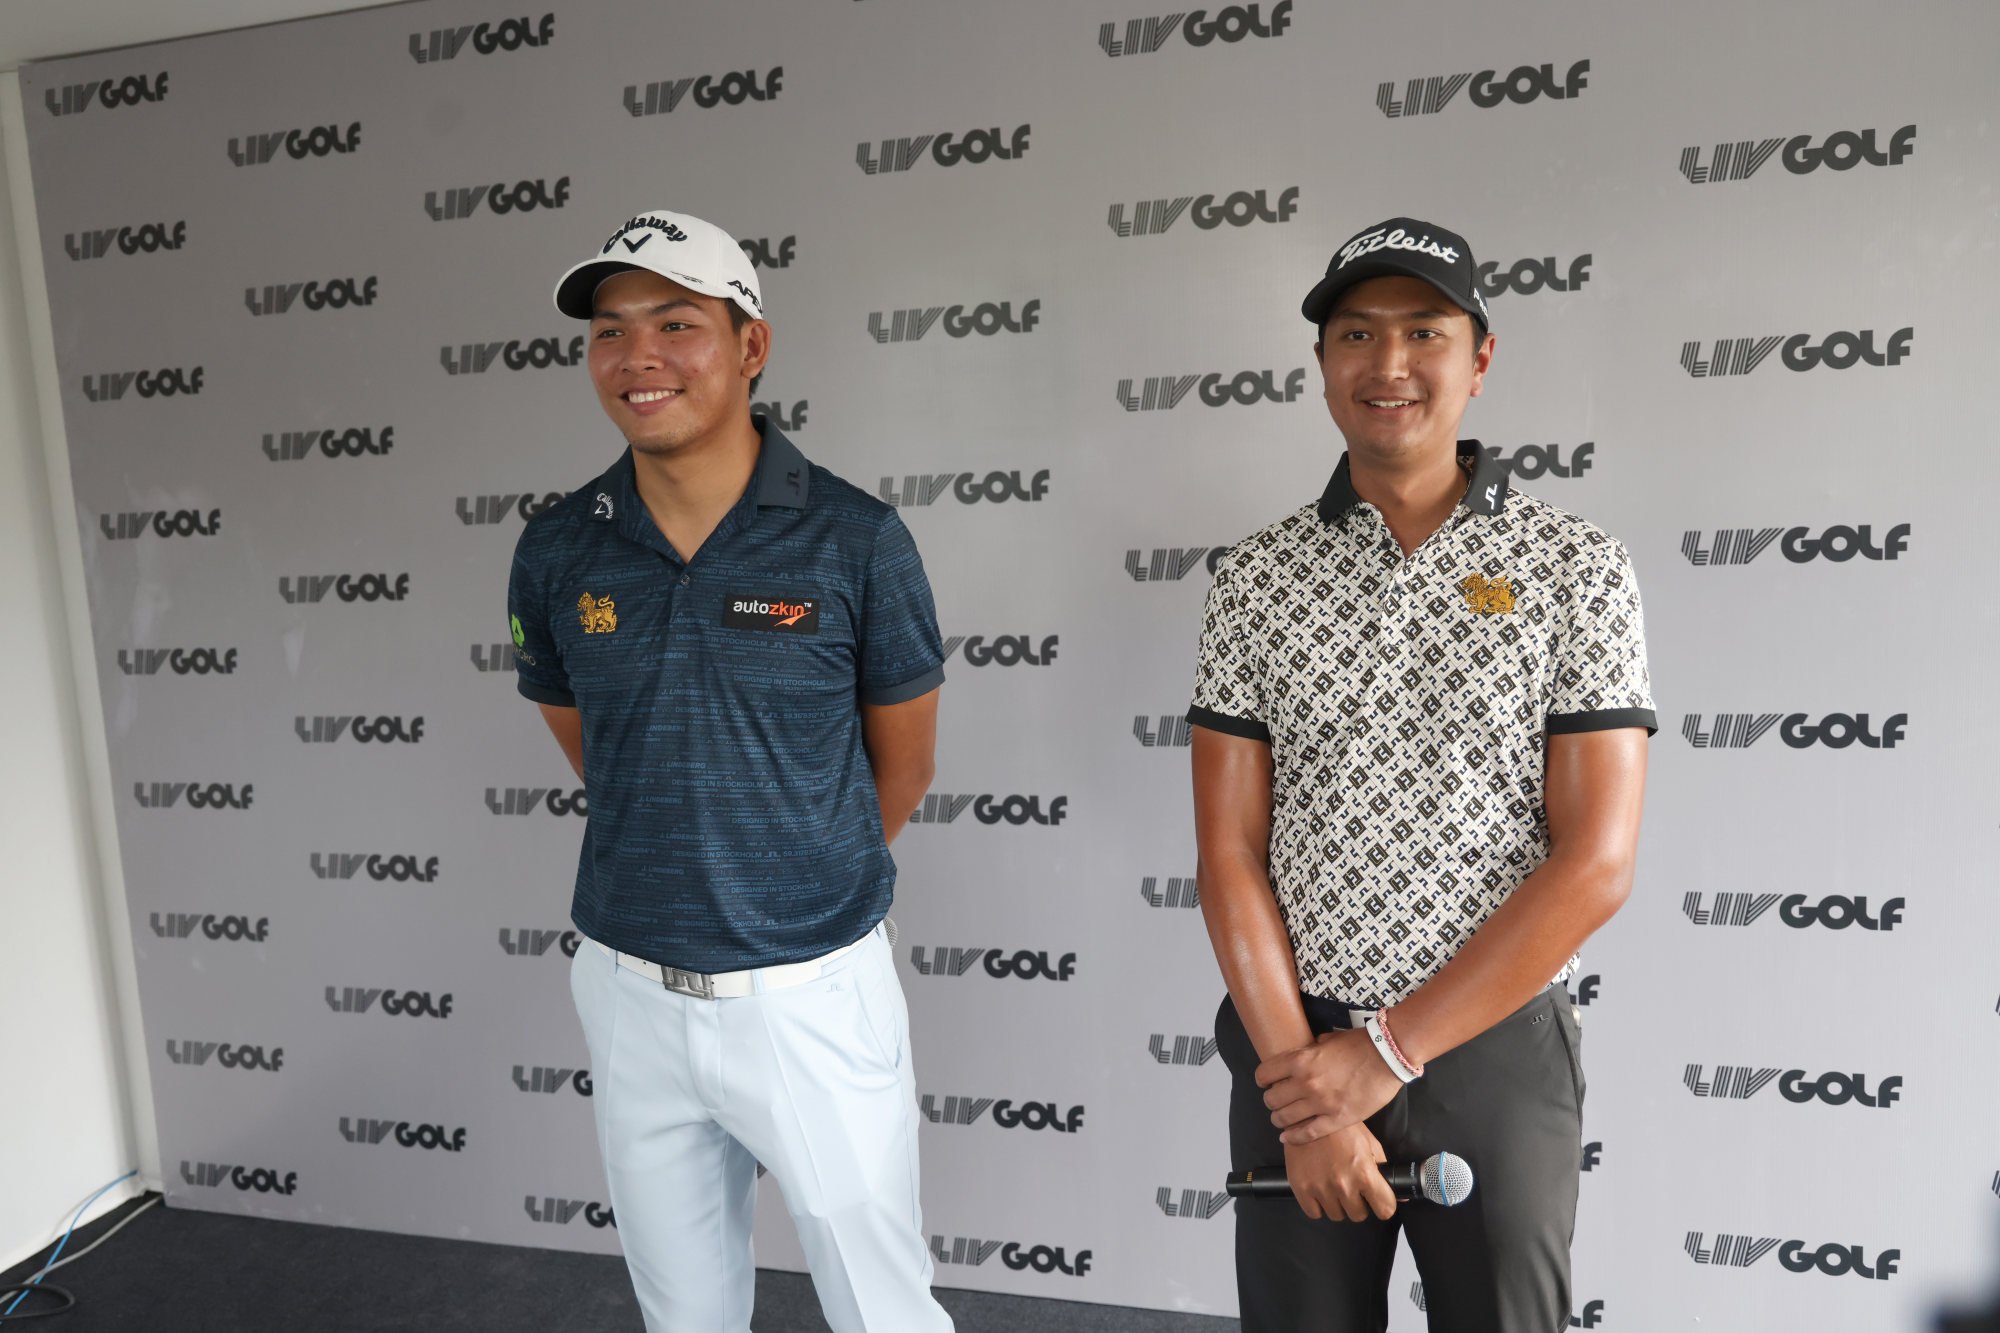 Music, shorts and tuk-tuks players embrace LIV Golfs revamped tournament style of play South China Morning Post